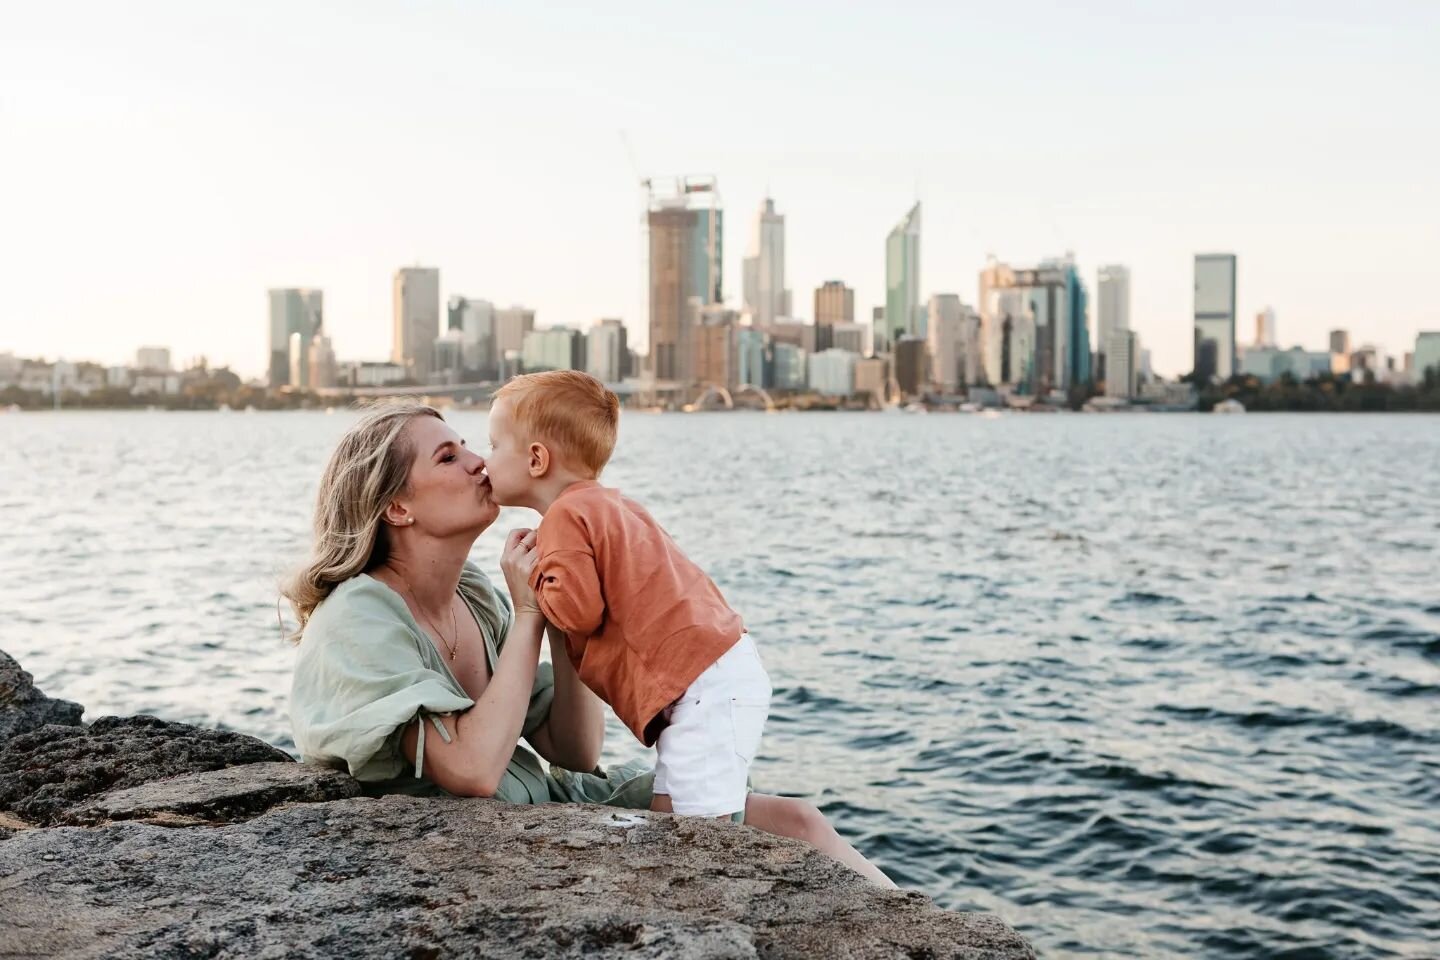 Kisses by the water side 😘

#perthphotographer #perthfamilyphotographer #perthmamas #perthmums #perthlife #ourclickdays #unconventionaltogs #storytellersofchaos #capturingchildhoodhub #clickcommunity #nothingisordinary #clickcommunityblog #clickaway